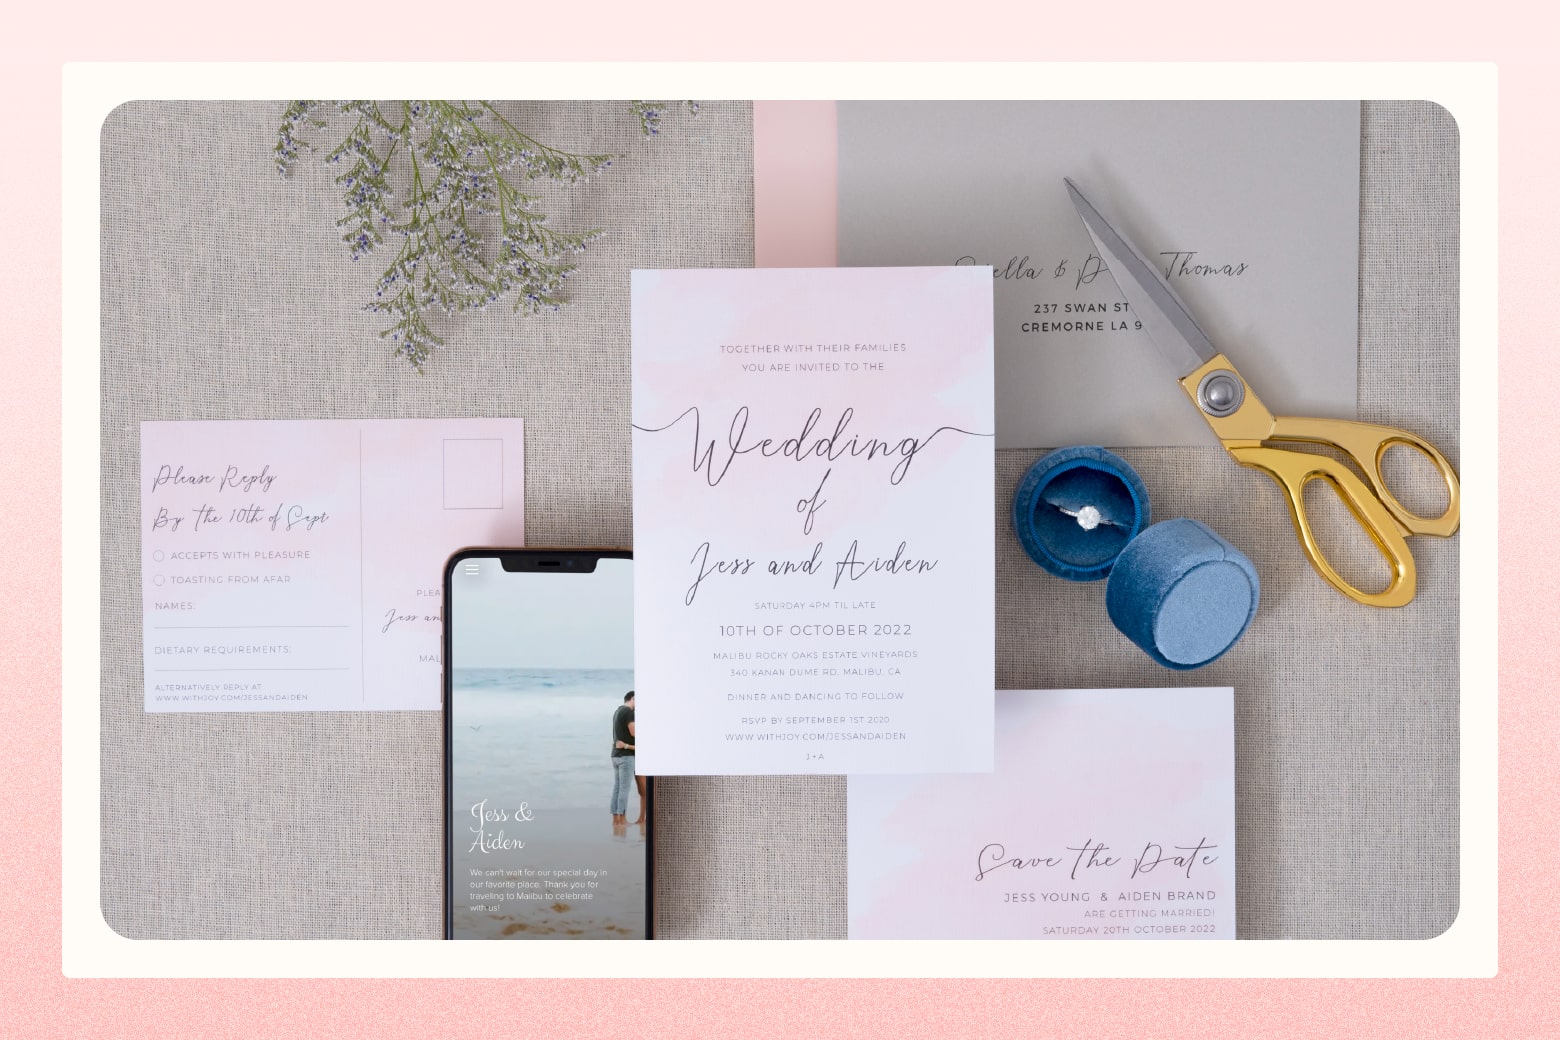 Wedding invitation suite for Jess and Arden, with a diamond ring in a round blue ring box and a pair of scissors next to it